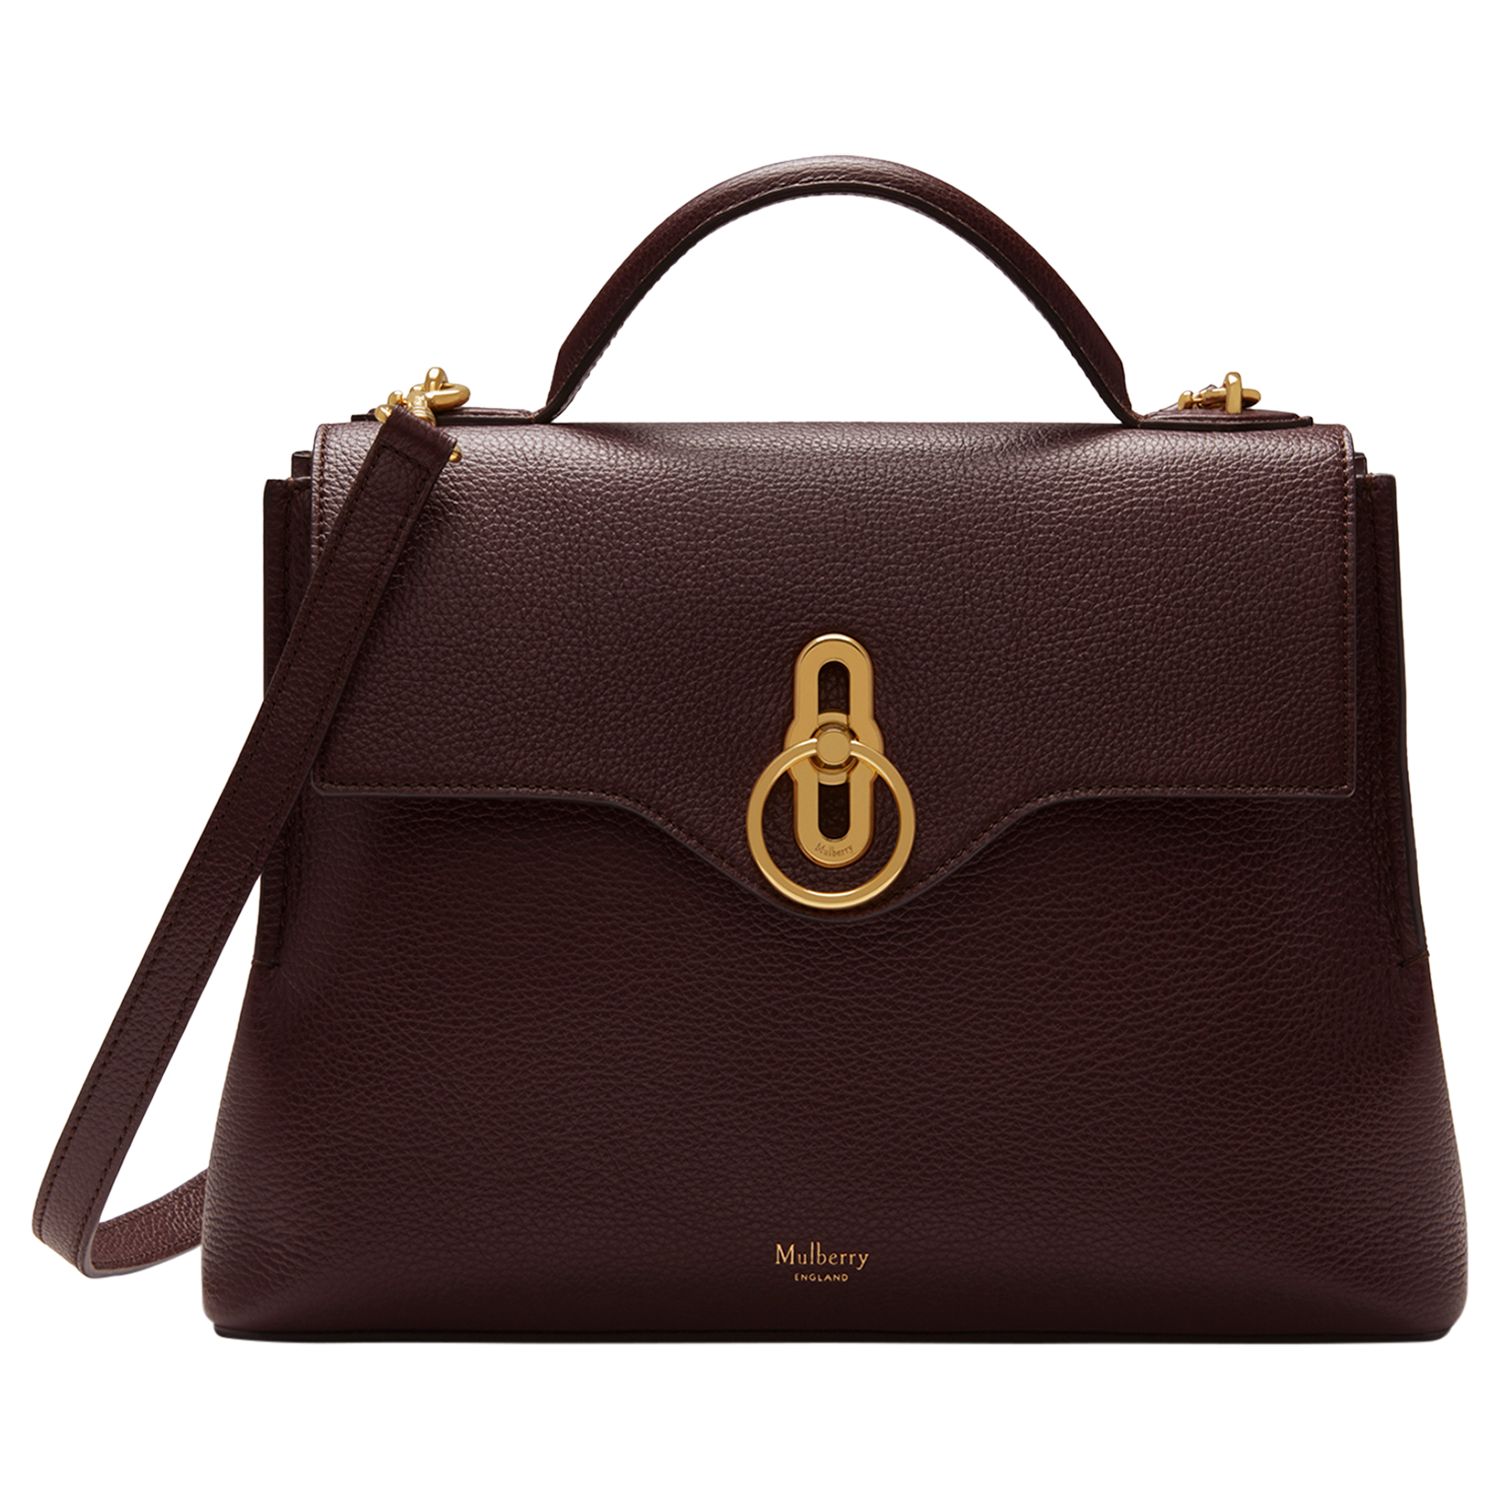 Mulberry Seaton Classic Grain Leather Small Satchel Bag at John Lewis ...